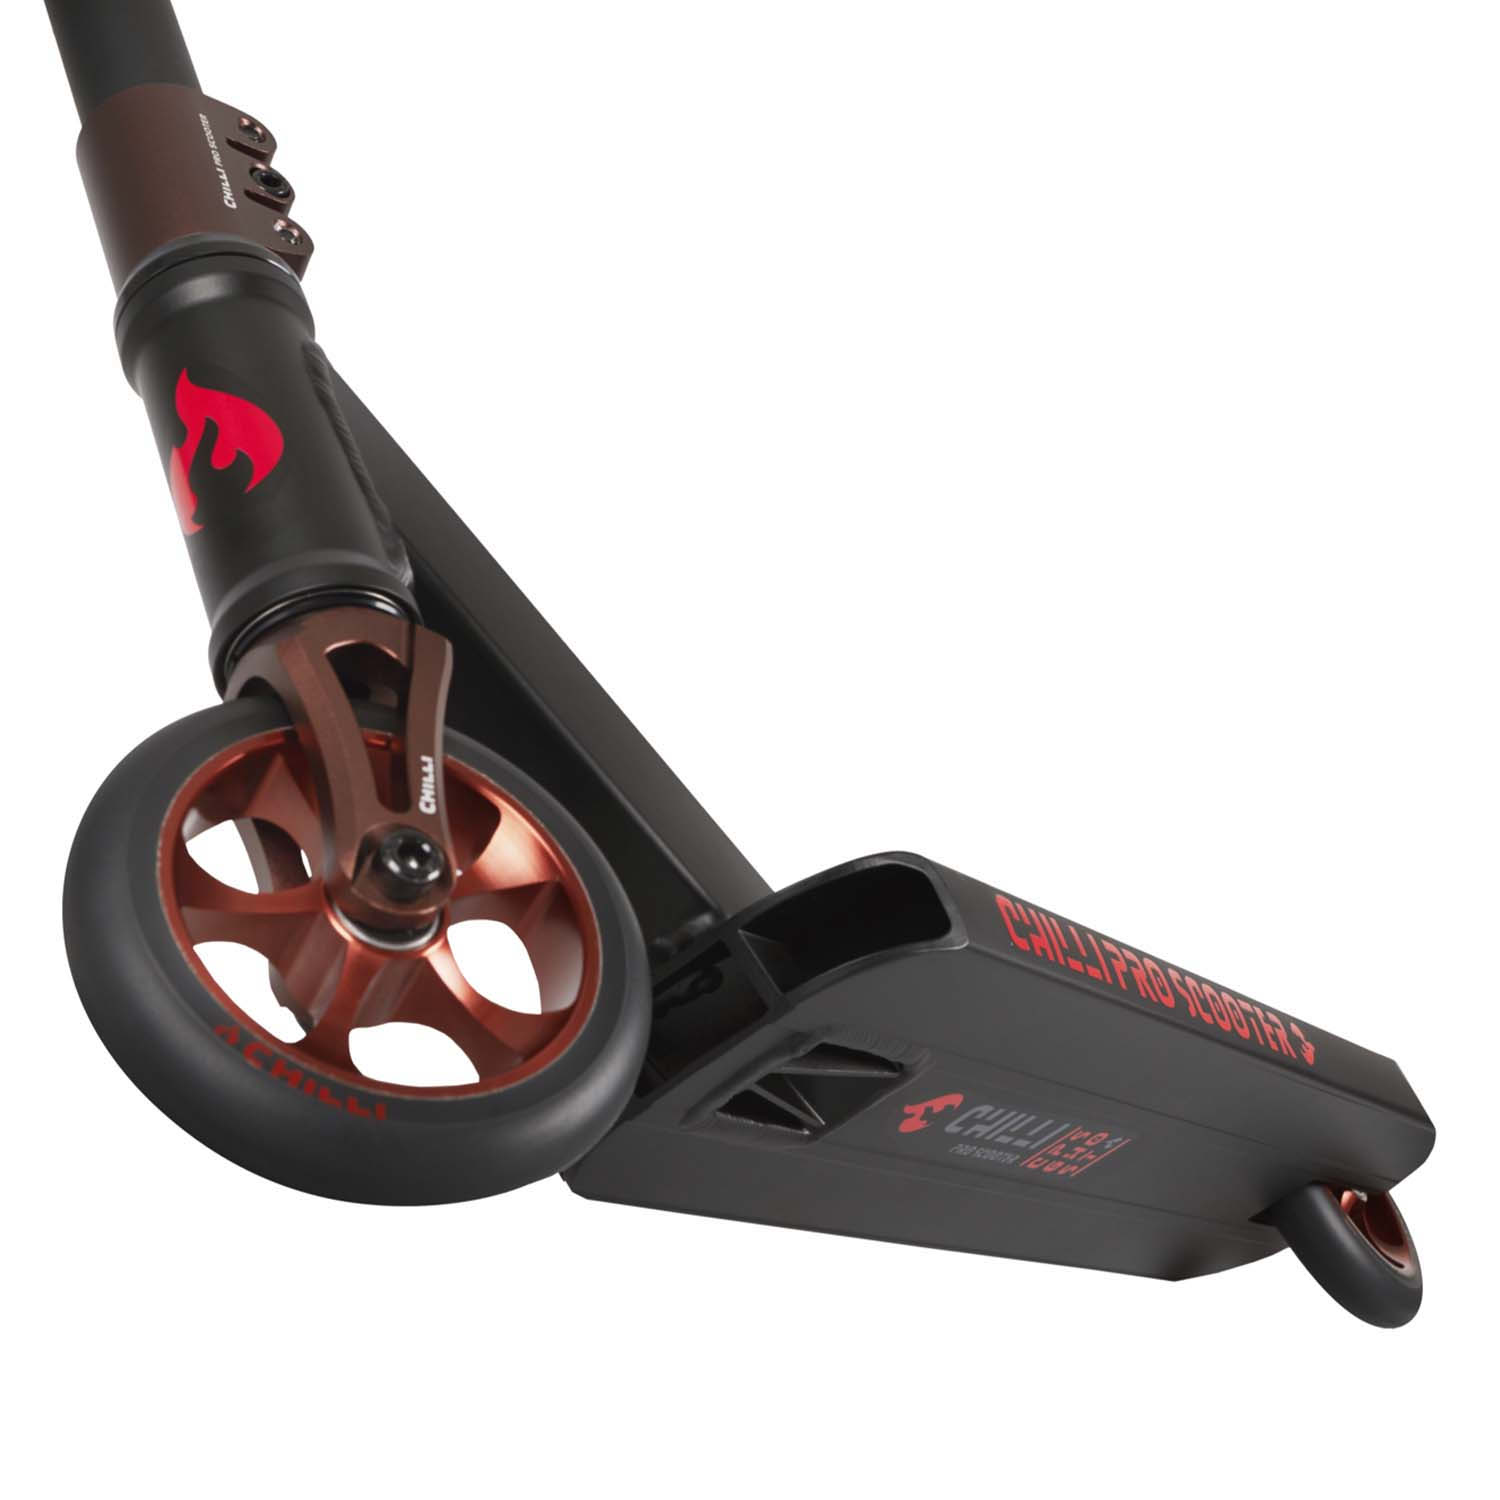 Самокат Chilli Pro Scooter Reaper Reloaded Ghost Copper